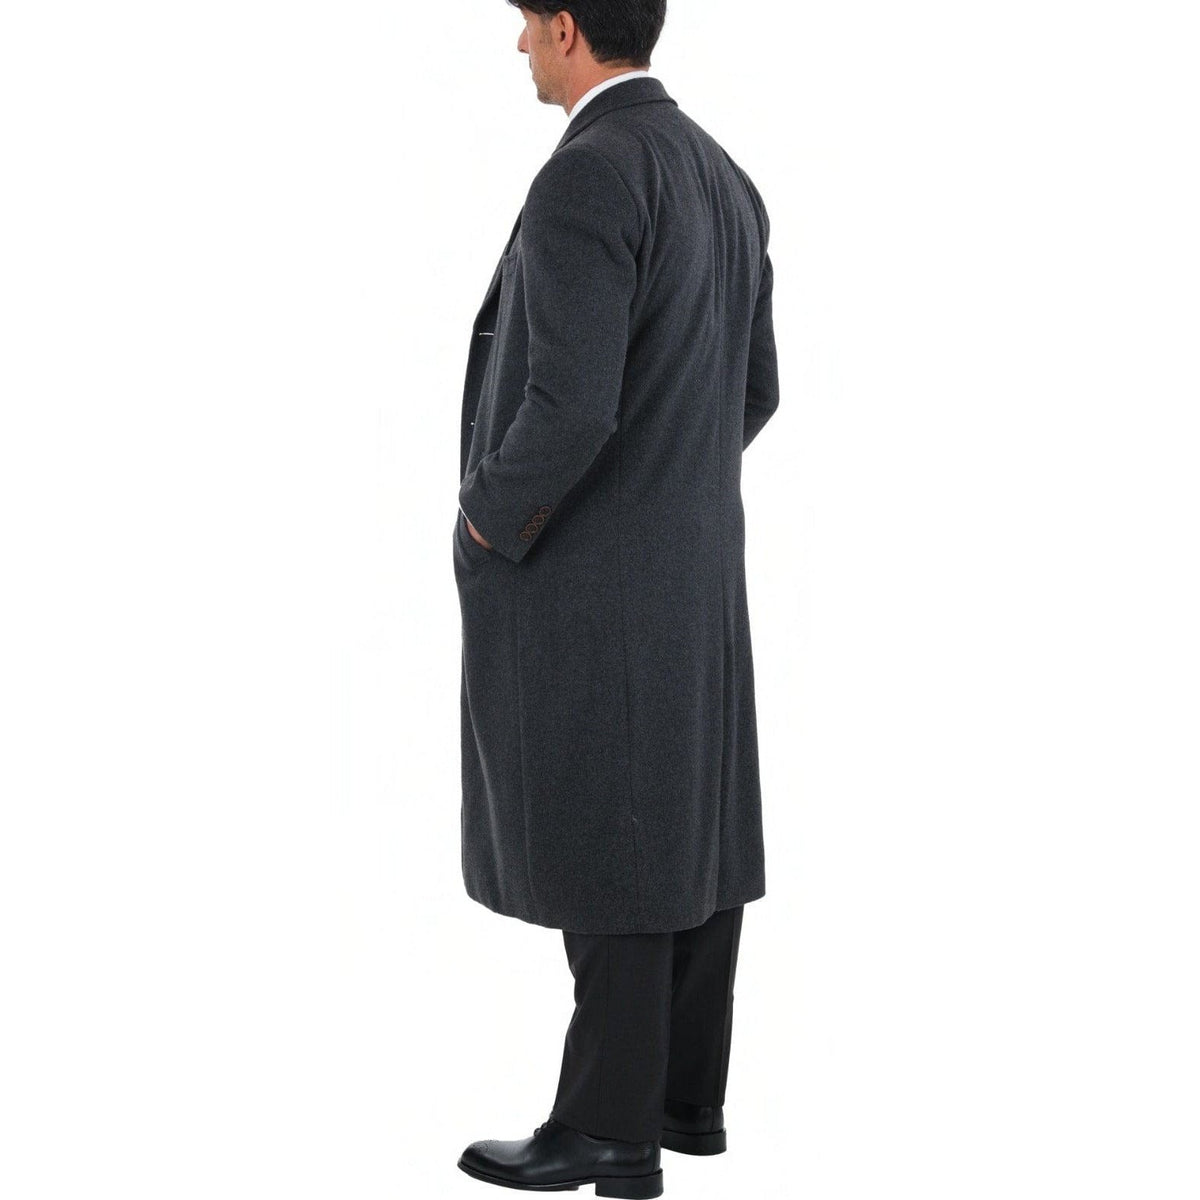 Arthur Black OUTERWEAR Mens Regular Fit Solid Charcoal Gray Full Length Wool Cashmere Overcoat Top Coat